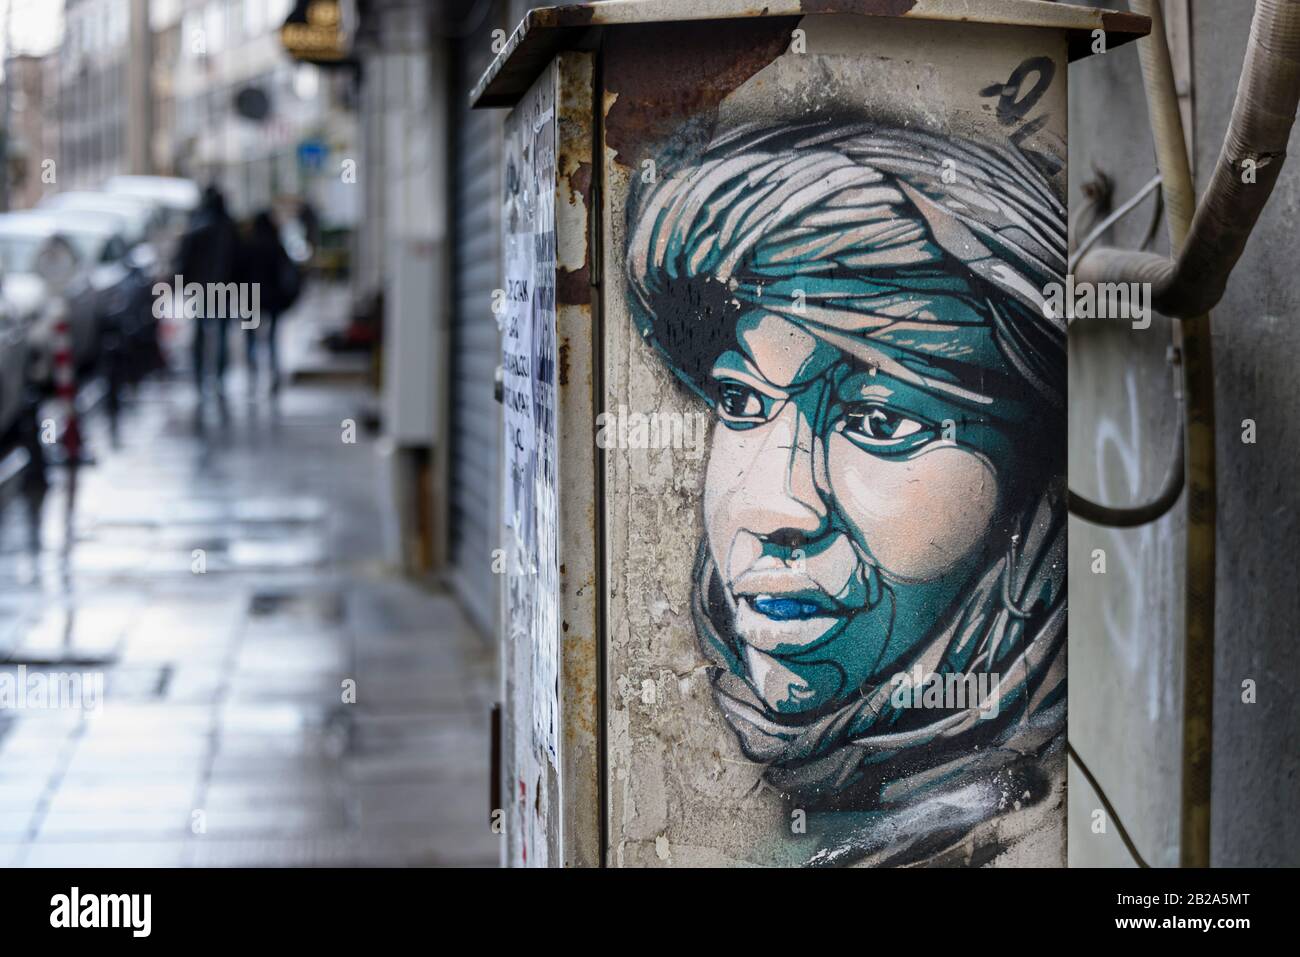 Street Art Of An Arab Boy Dressed In Desert Robes On The Side Of A